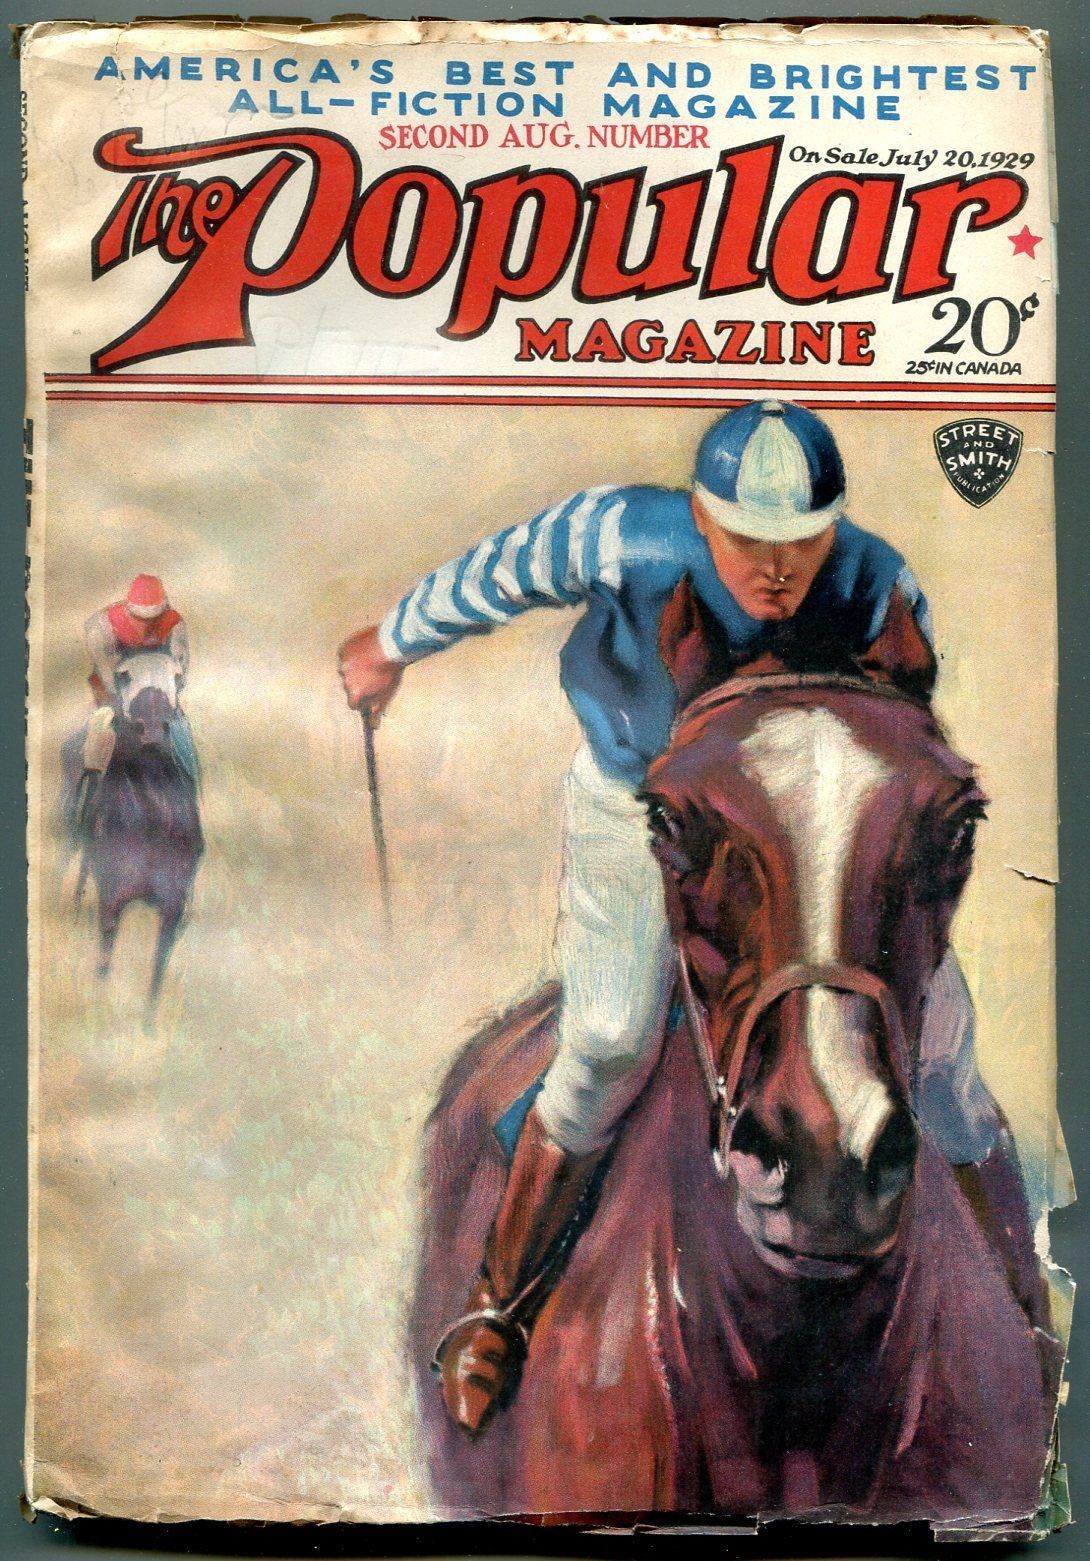 Popular Pulp Magazine 2nd August 1929- Horse Racing cover - $63.05